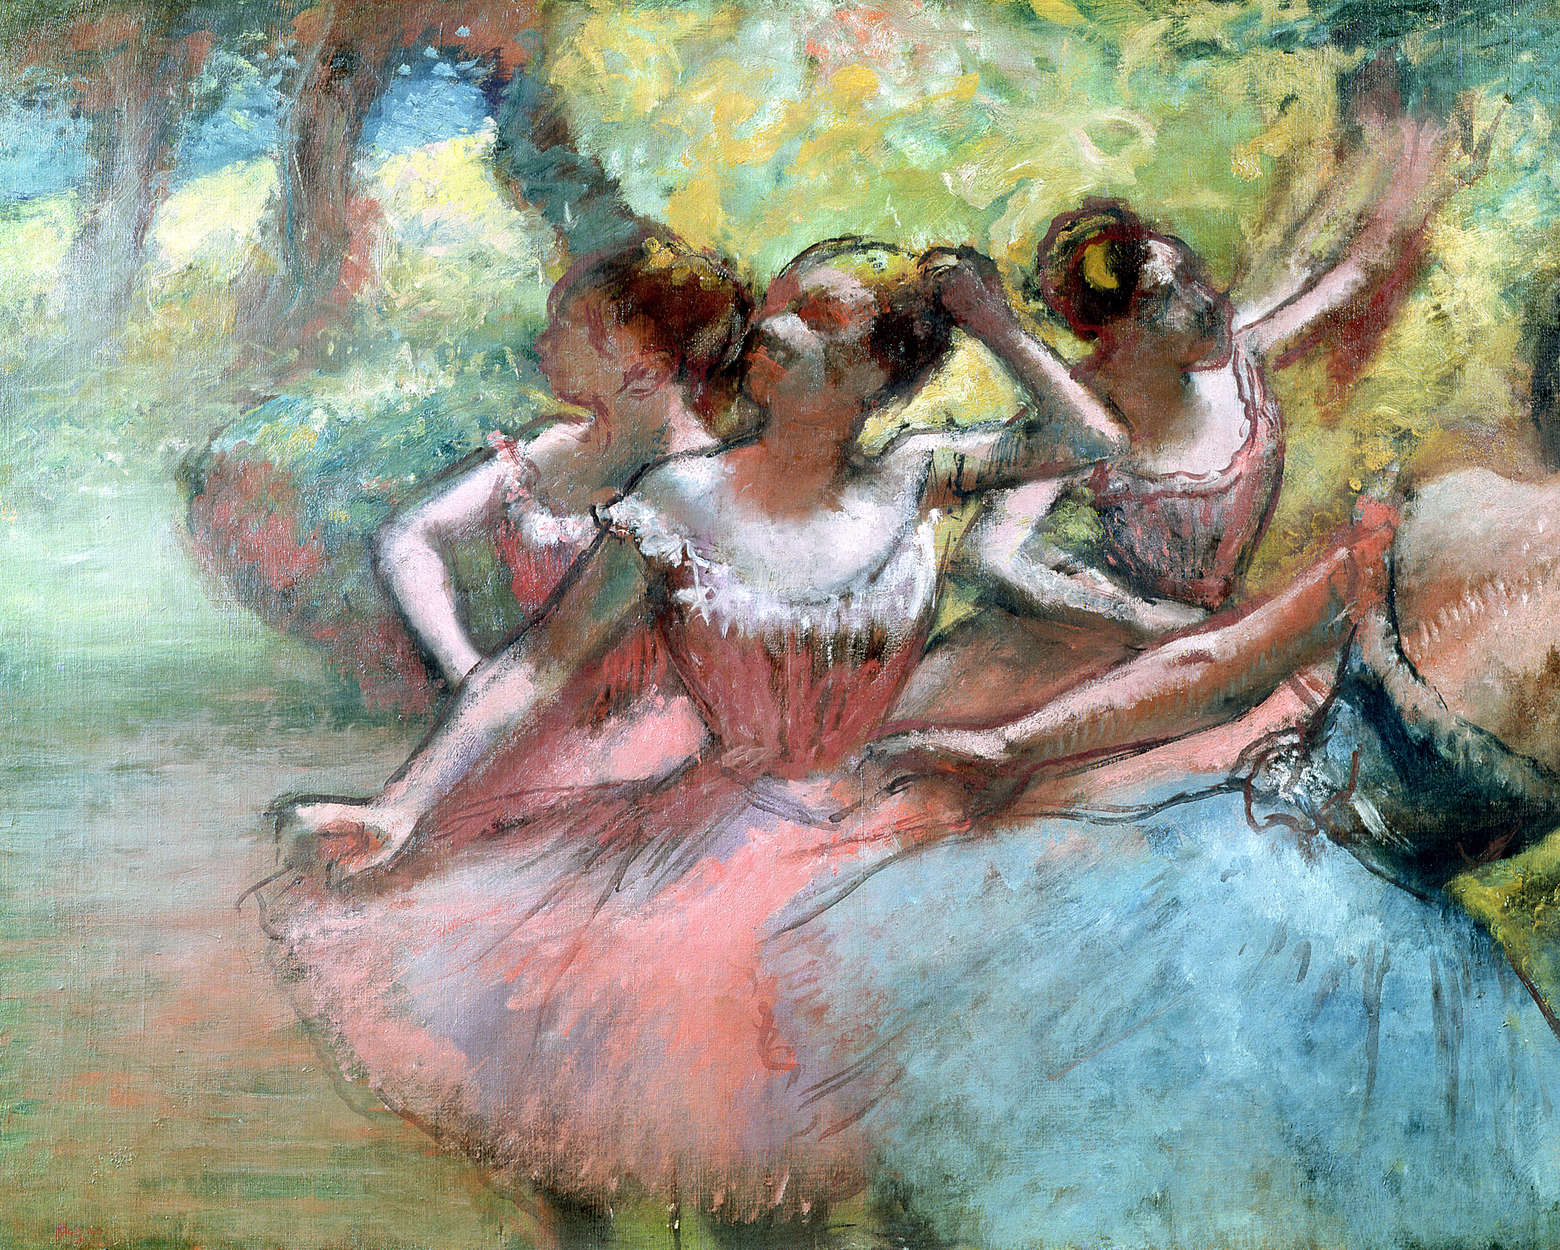             Four ballerinas on stage" mural by Hilaire Degas
        